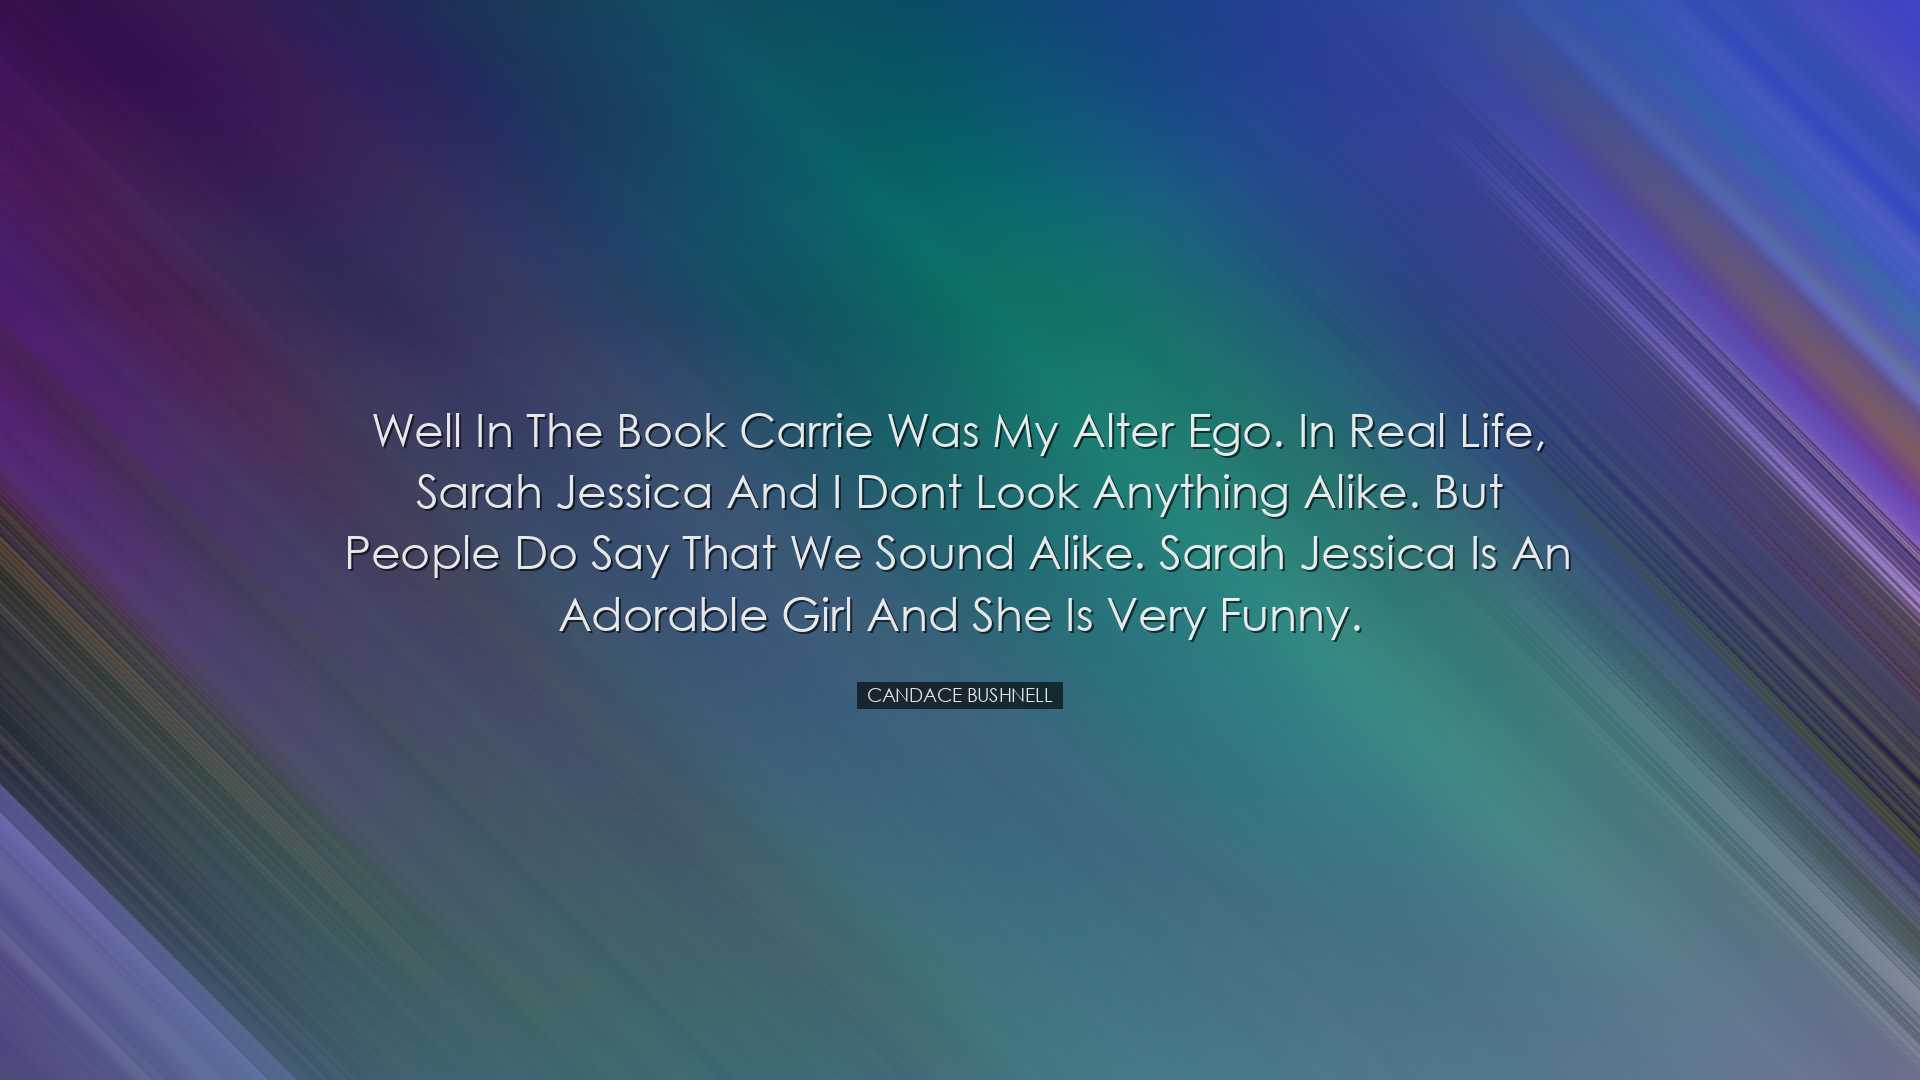 Well in the book Carrie was my alter ego. In real life, Sarah Jess